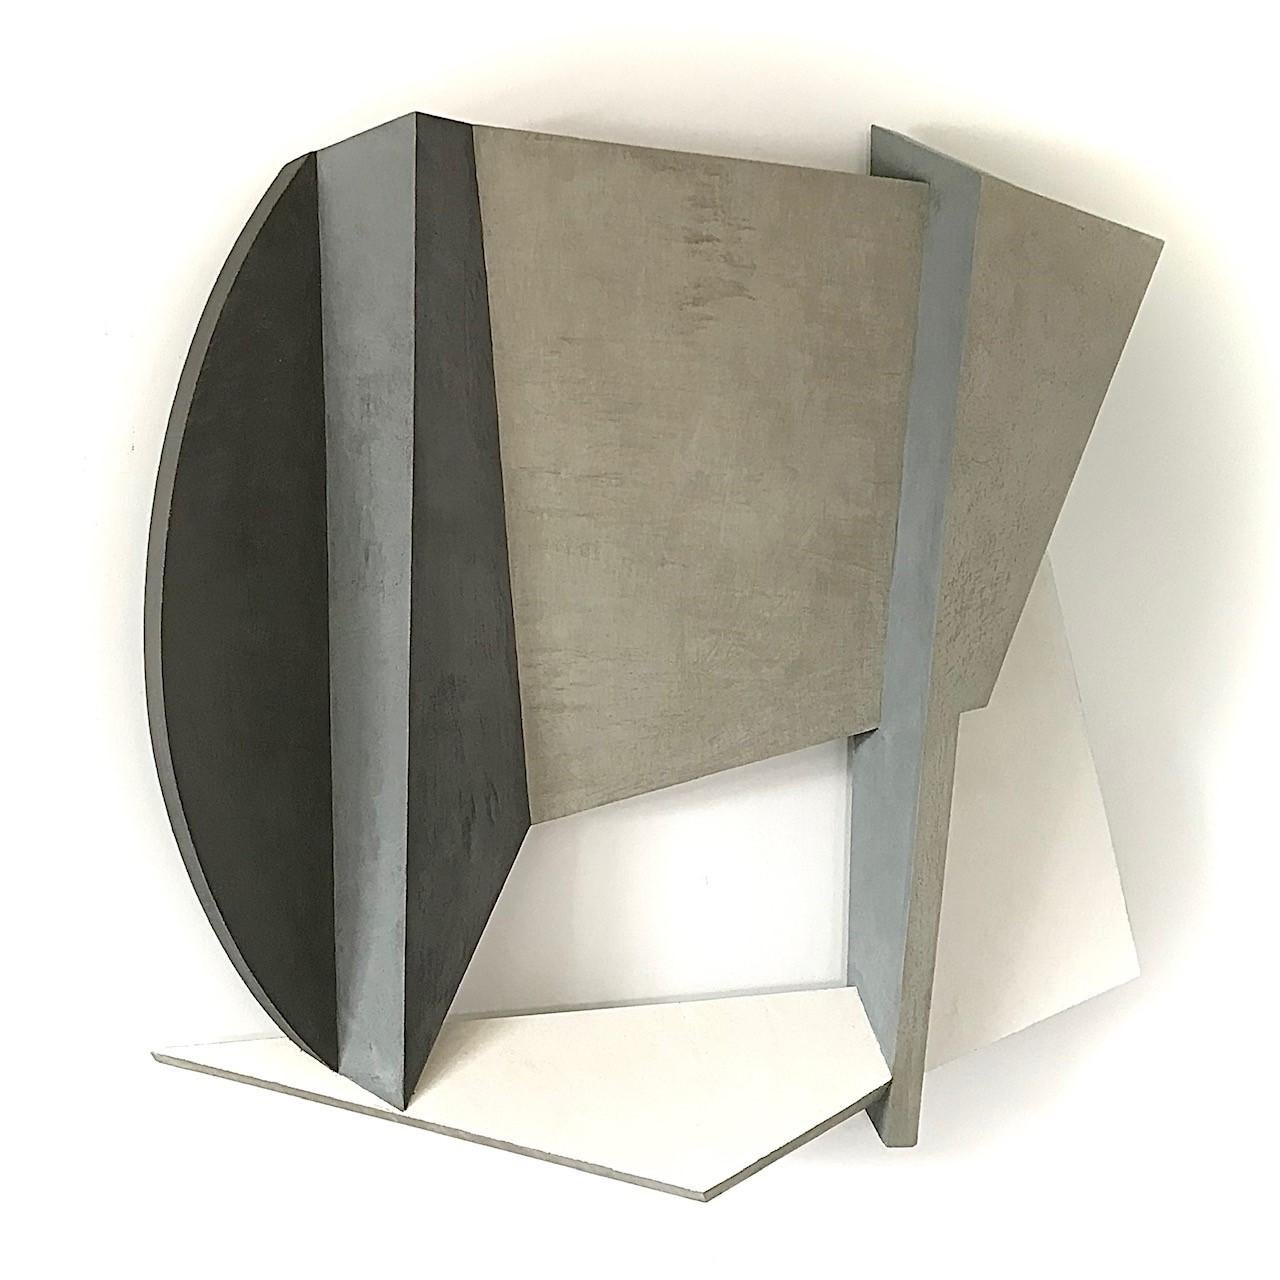 Dai Ban Abstract Sculpture - Hope You Don't See Me (Abstract Geometric Wall Sculpture in White and Gray)